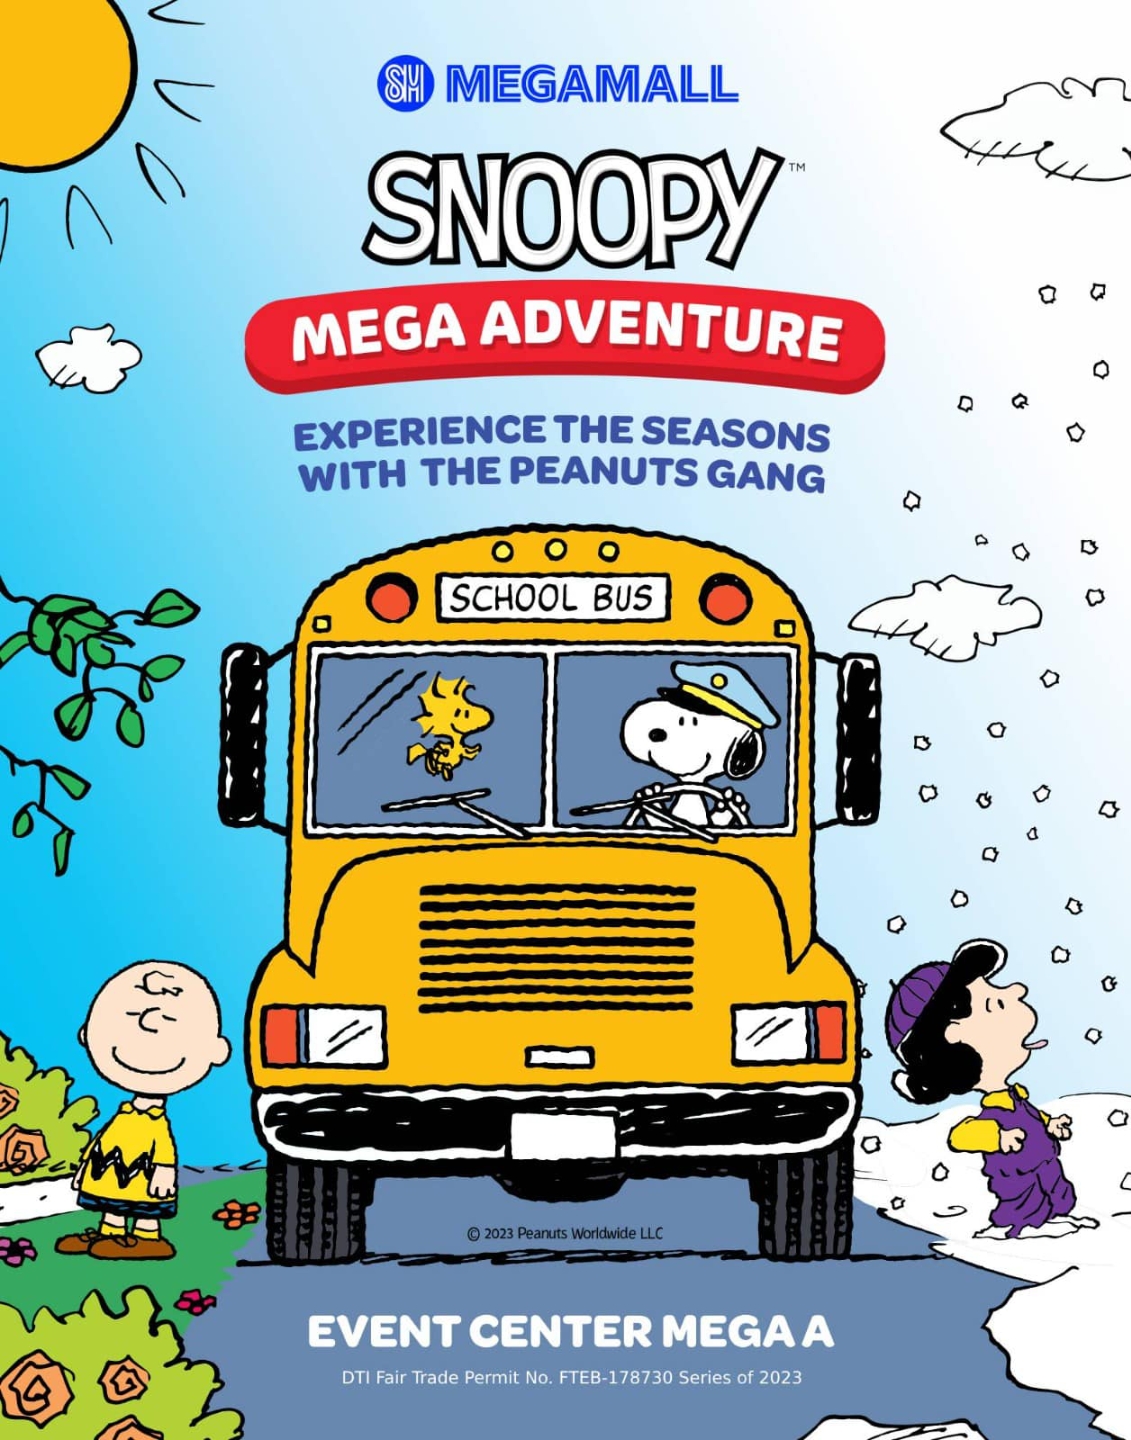 Experience Snoopy Mega Adventure with the Peanuts Gang